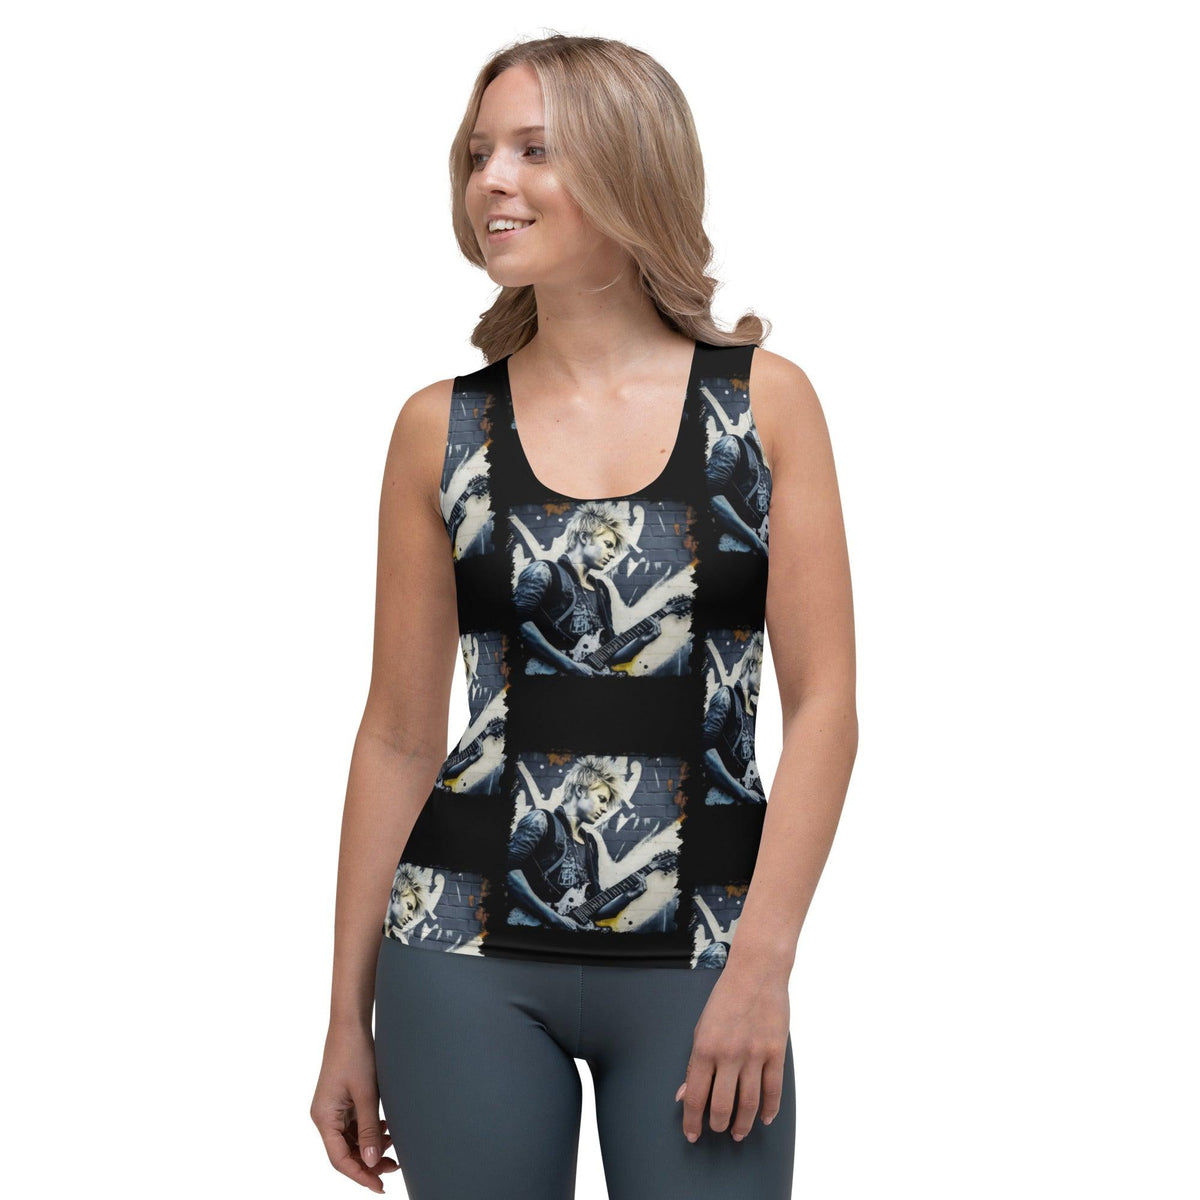 Dazzling The Crowd Sublimation Cut & Sew Tank Top - Beyond T-shirts